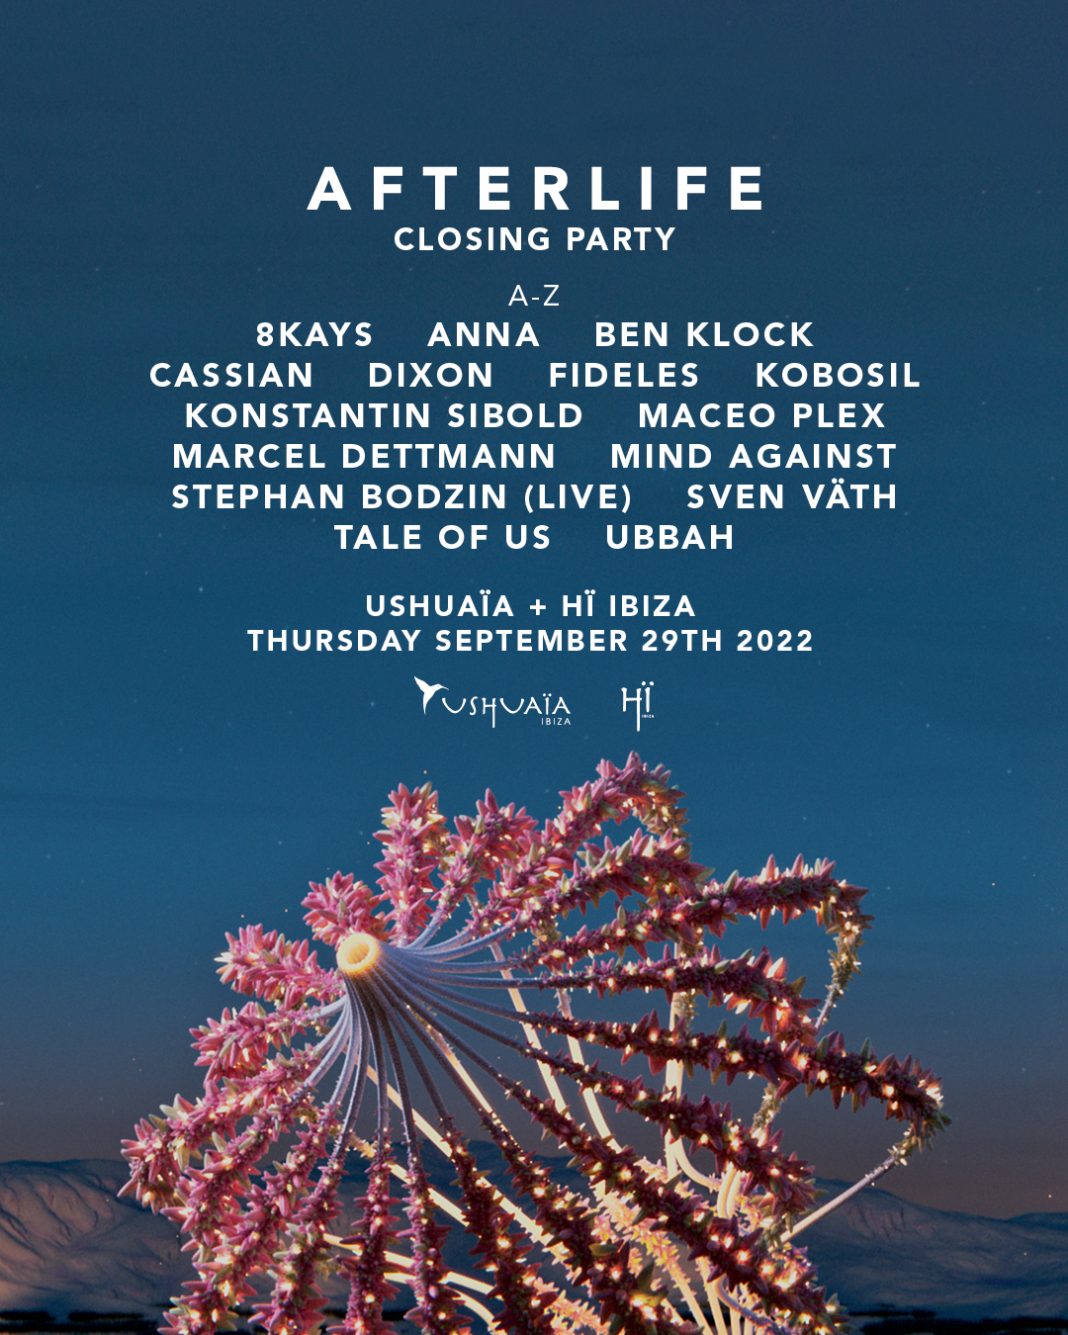 The Afterlife Closing Party at Ushuaïa and Hï Ibiza announced by Tale of Us